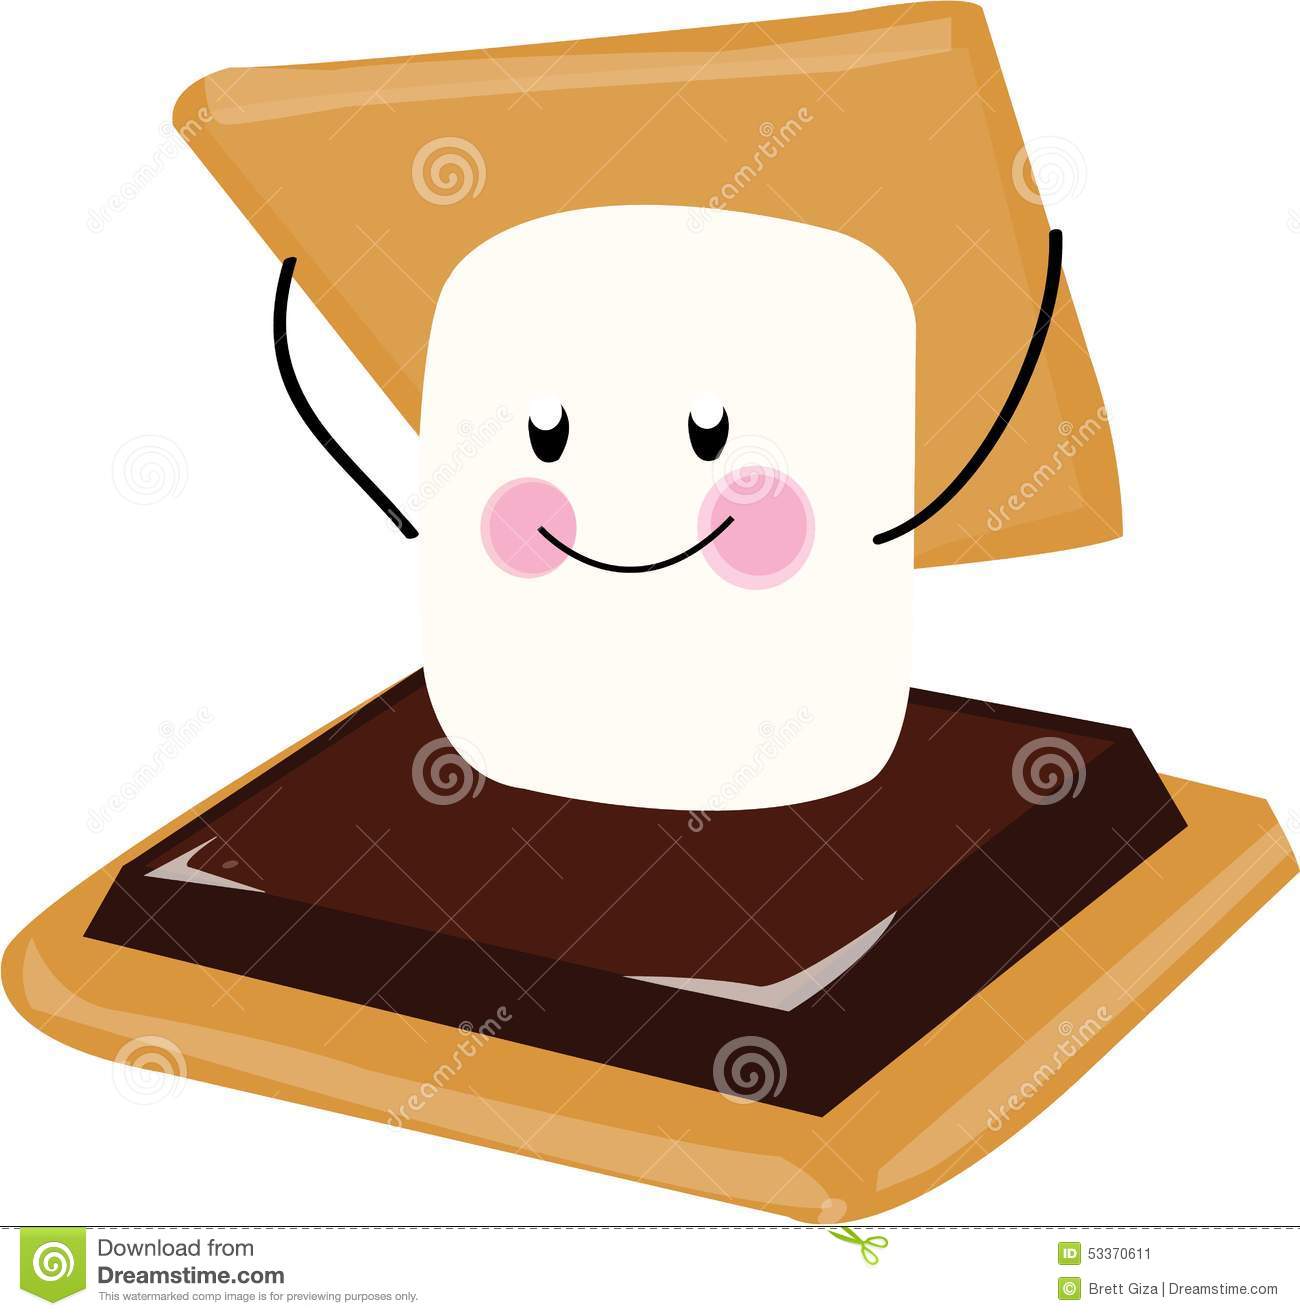 smores clipart black and whit